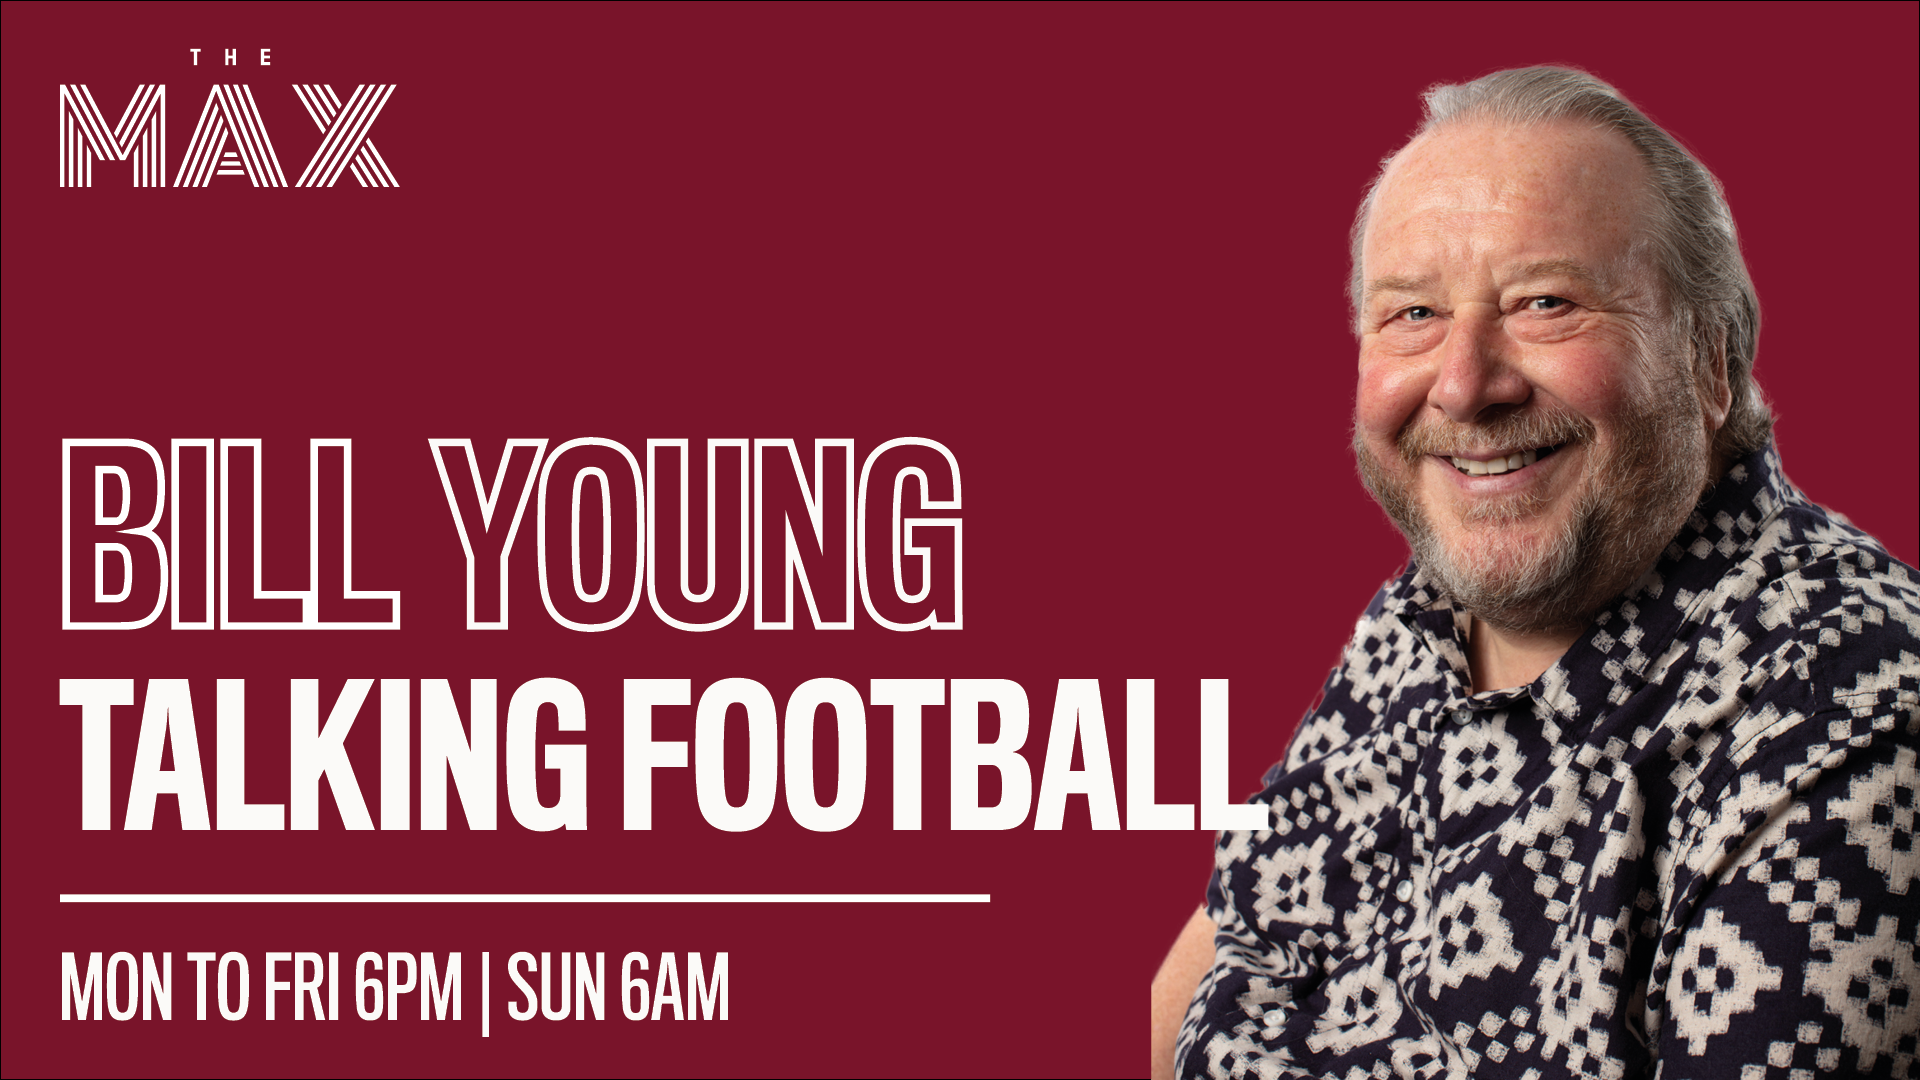 Talking Football with Bill Young - Thursday 8th April